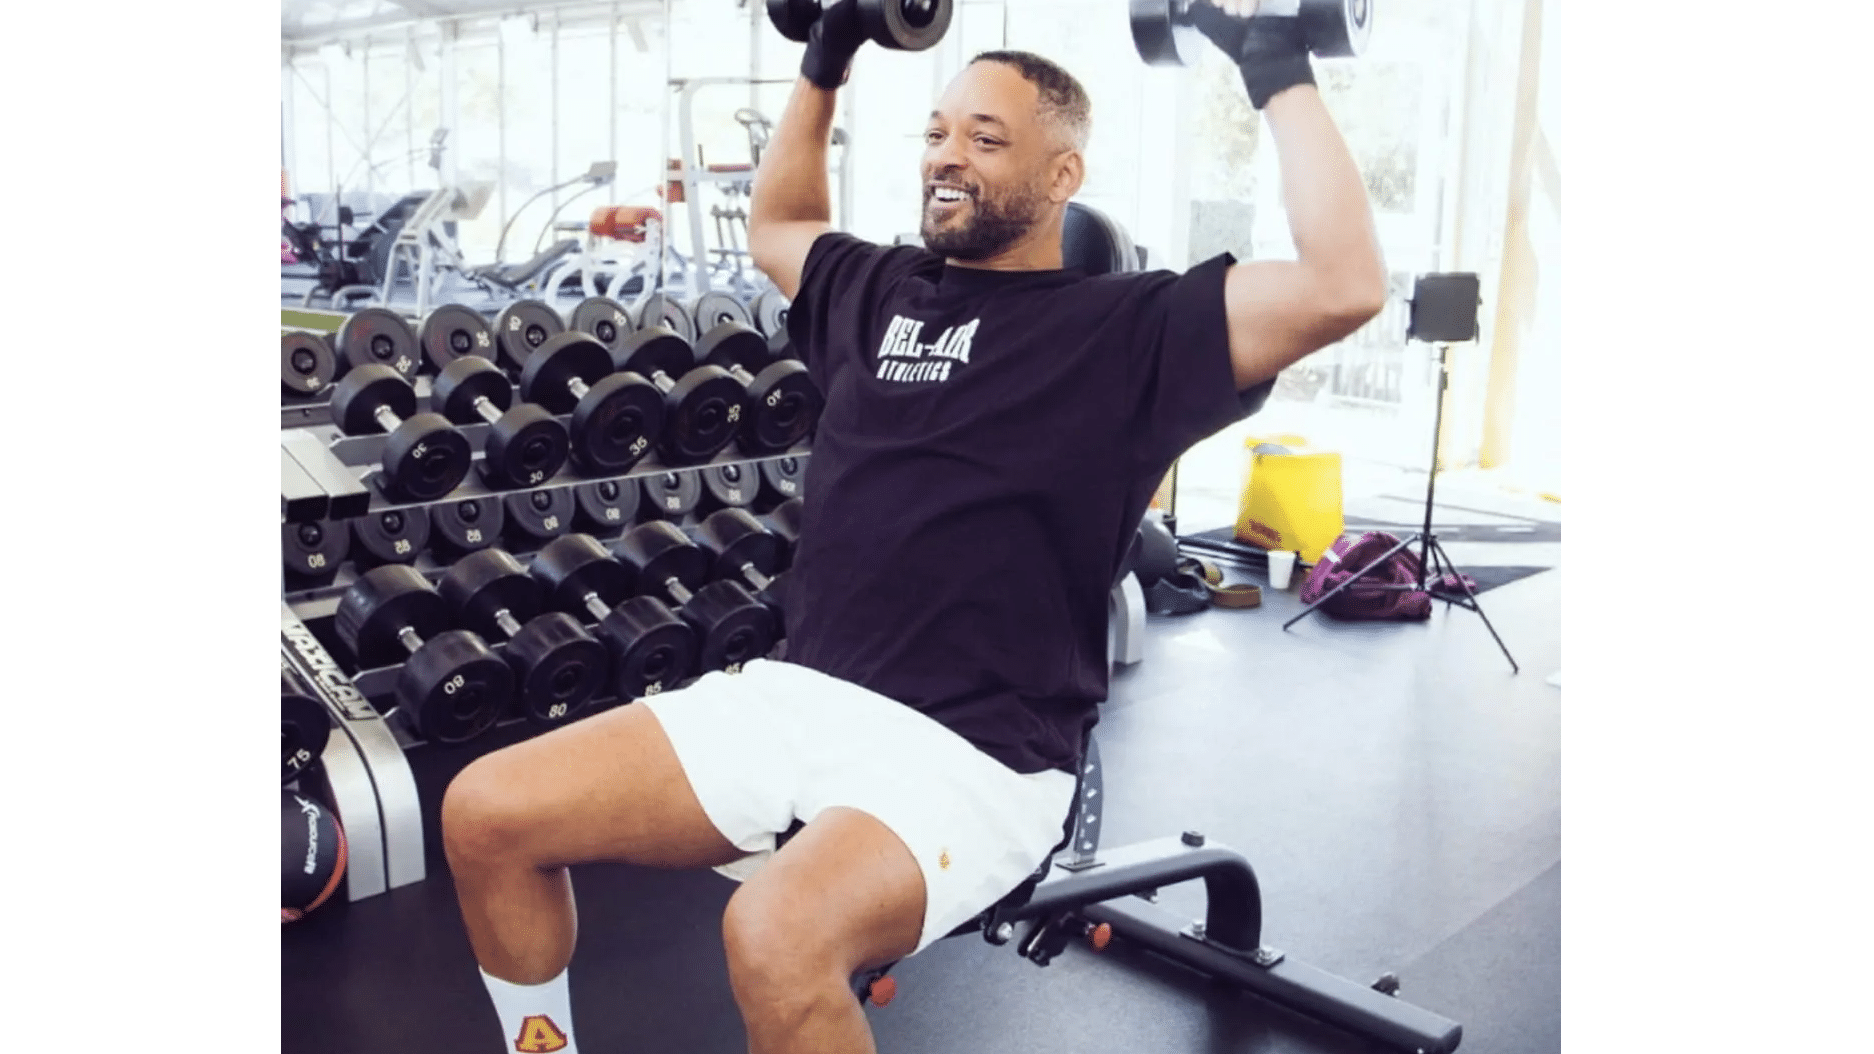 Will Smith forgets how to use gym equipment. Watch